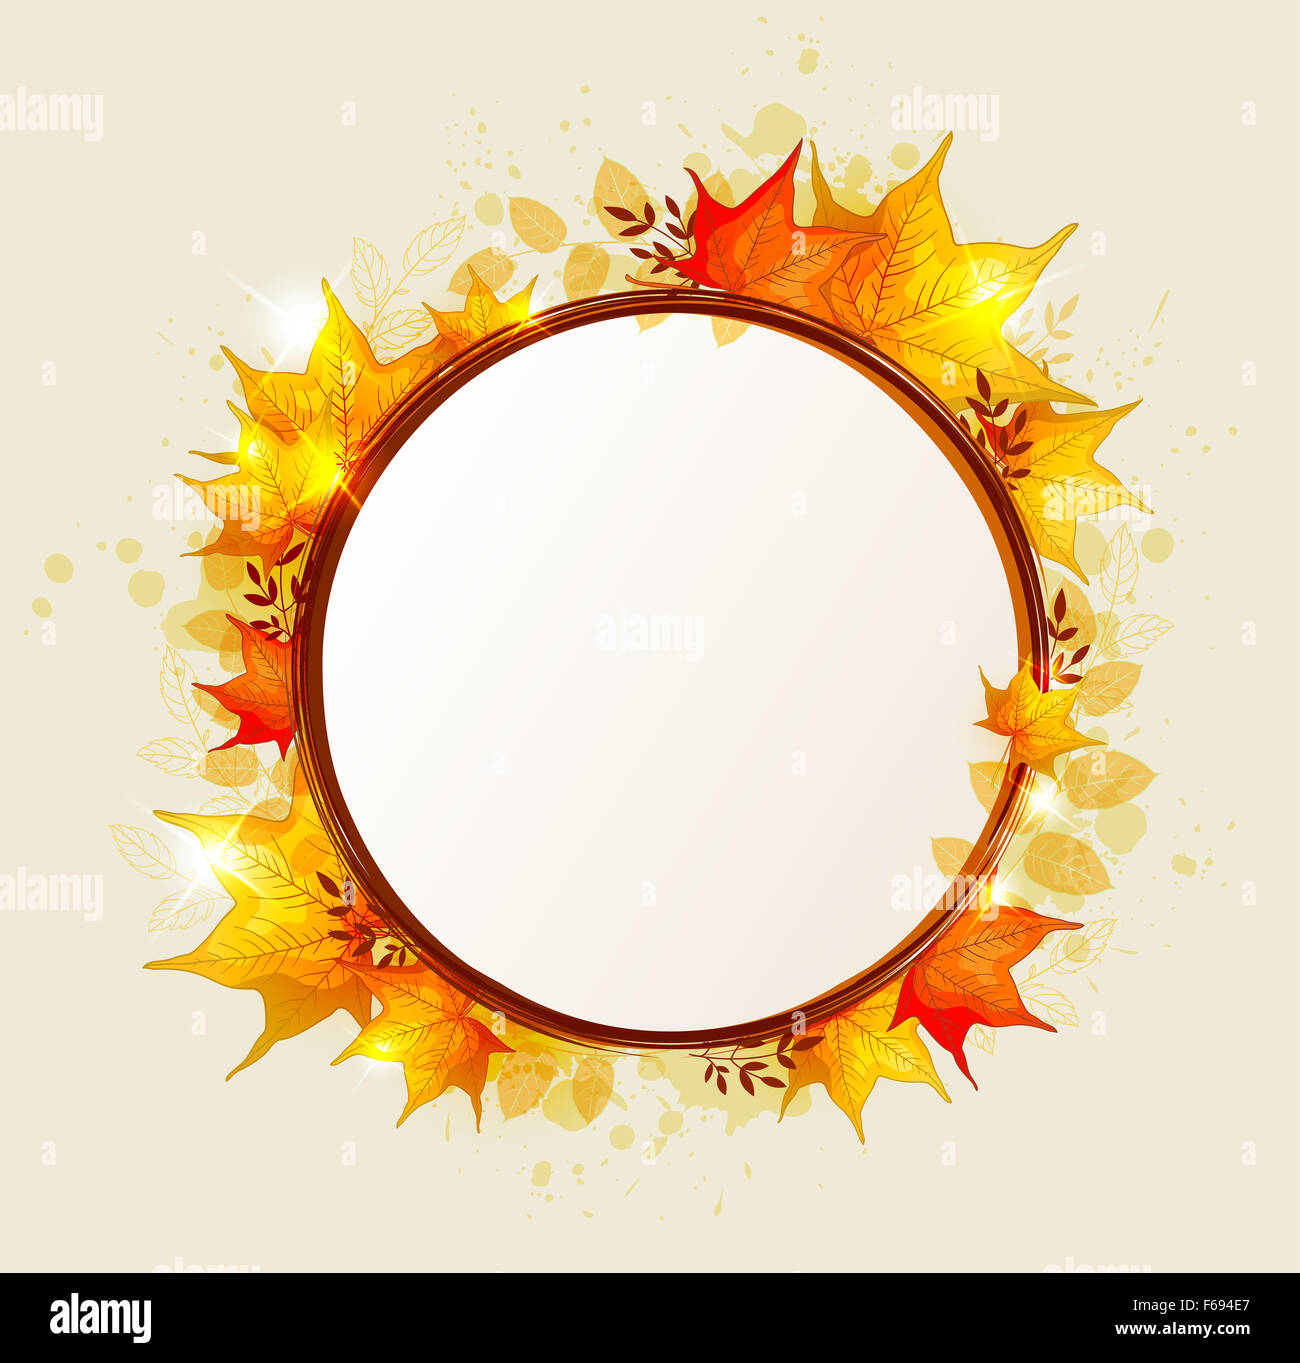 Abstract round autumn banner with red and orange leaves Stock Photo